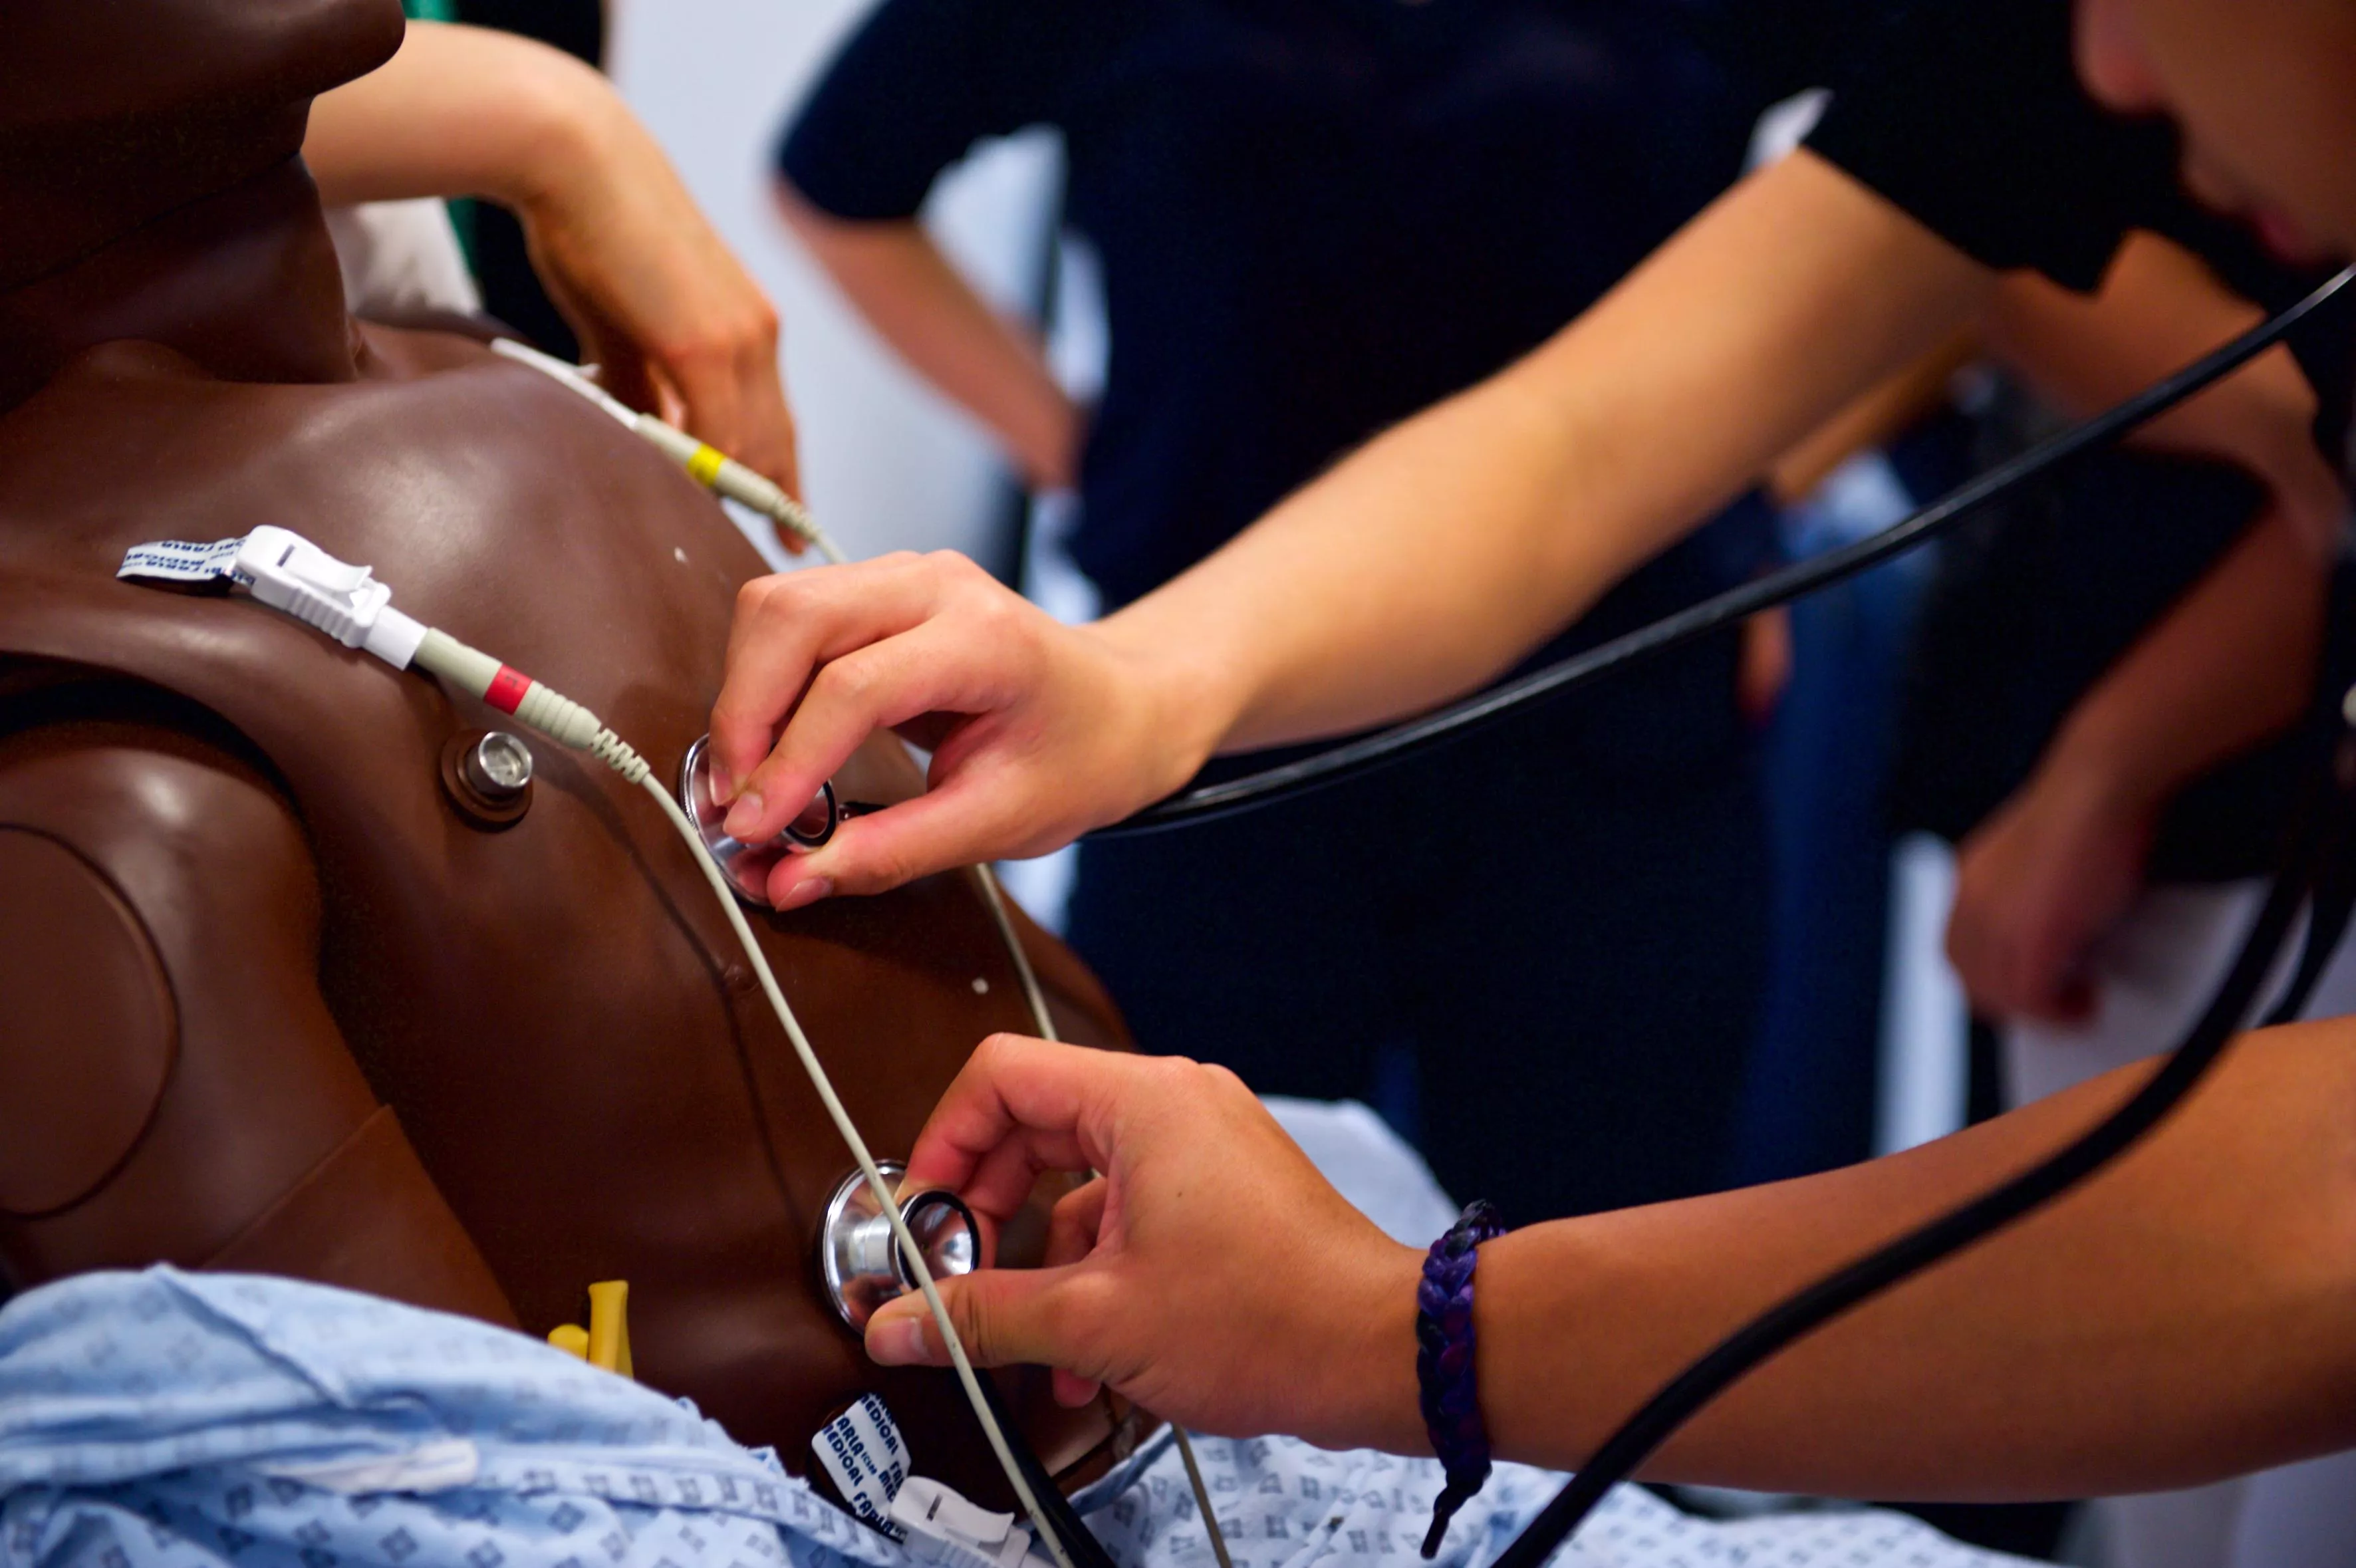 medical students listening for a heartbeat on a training manikin